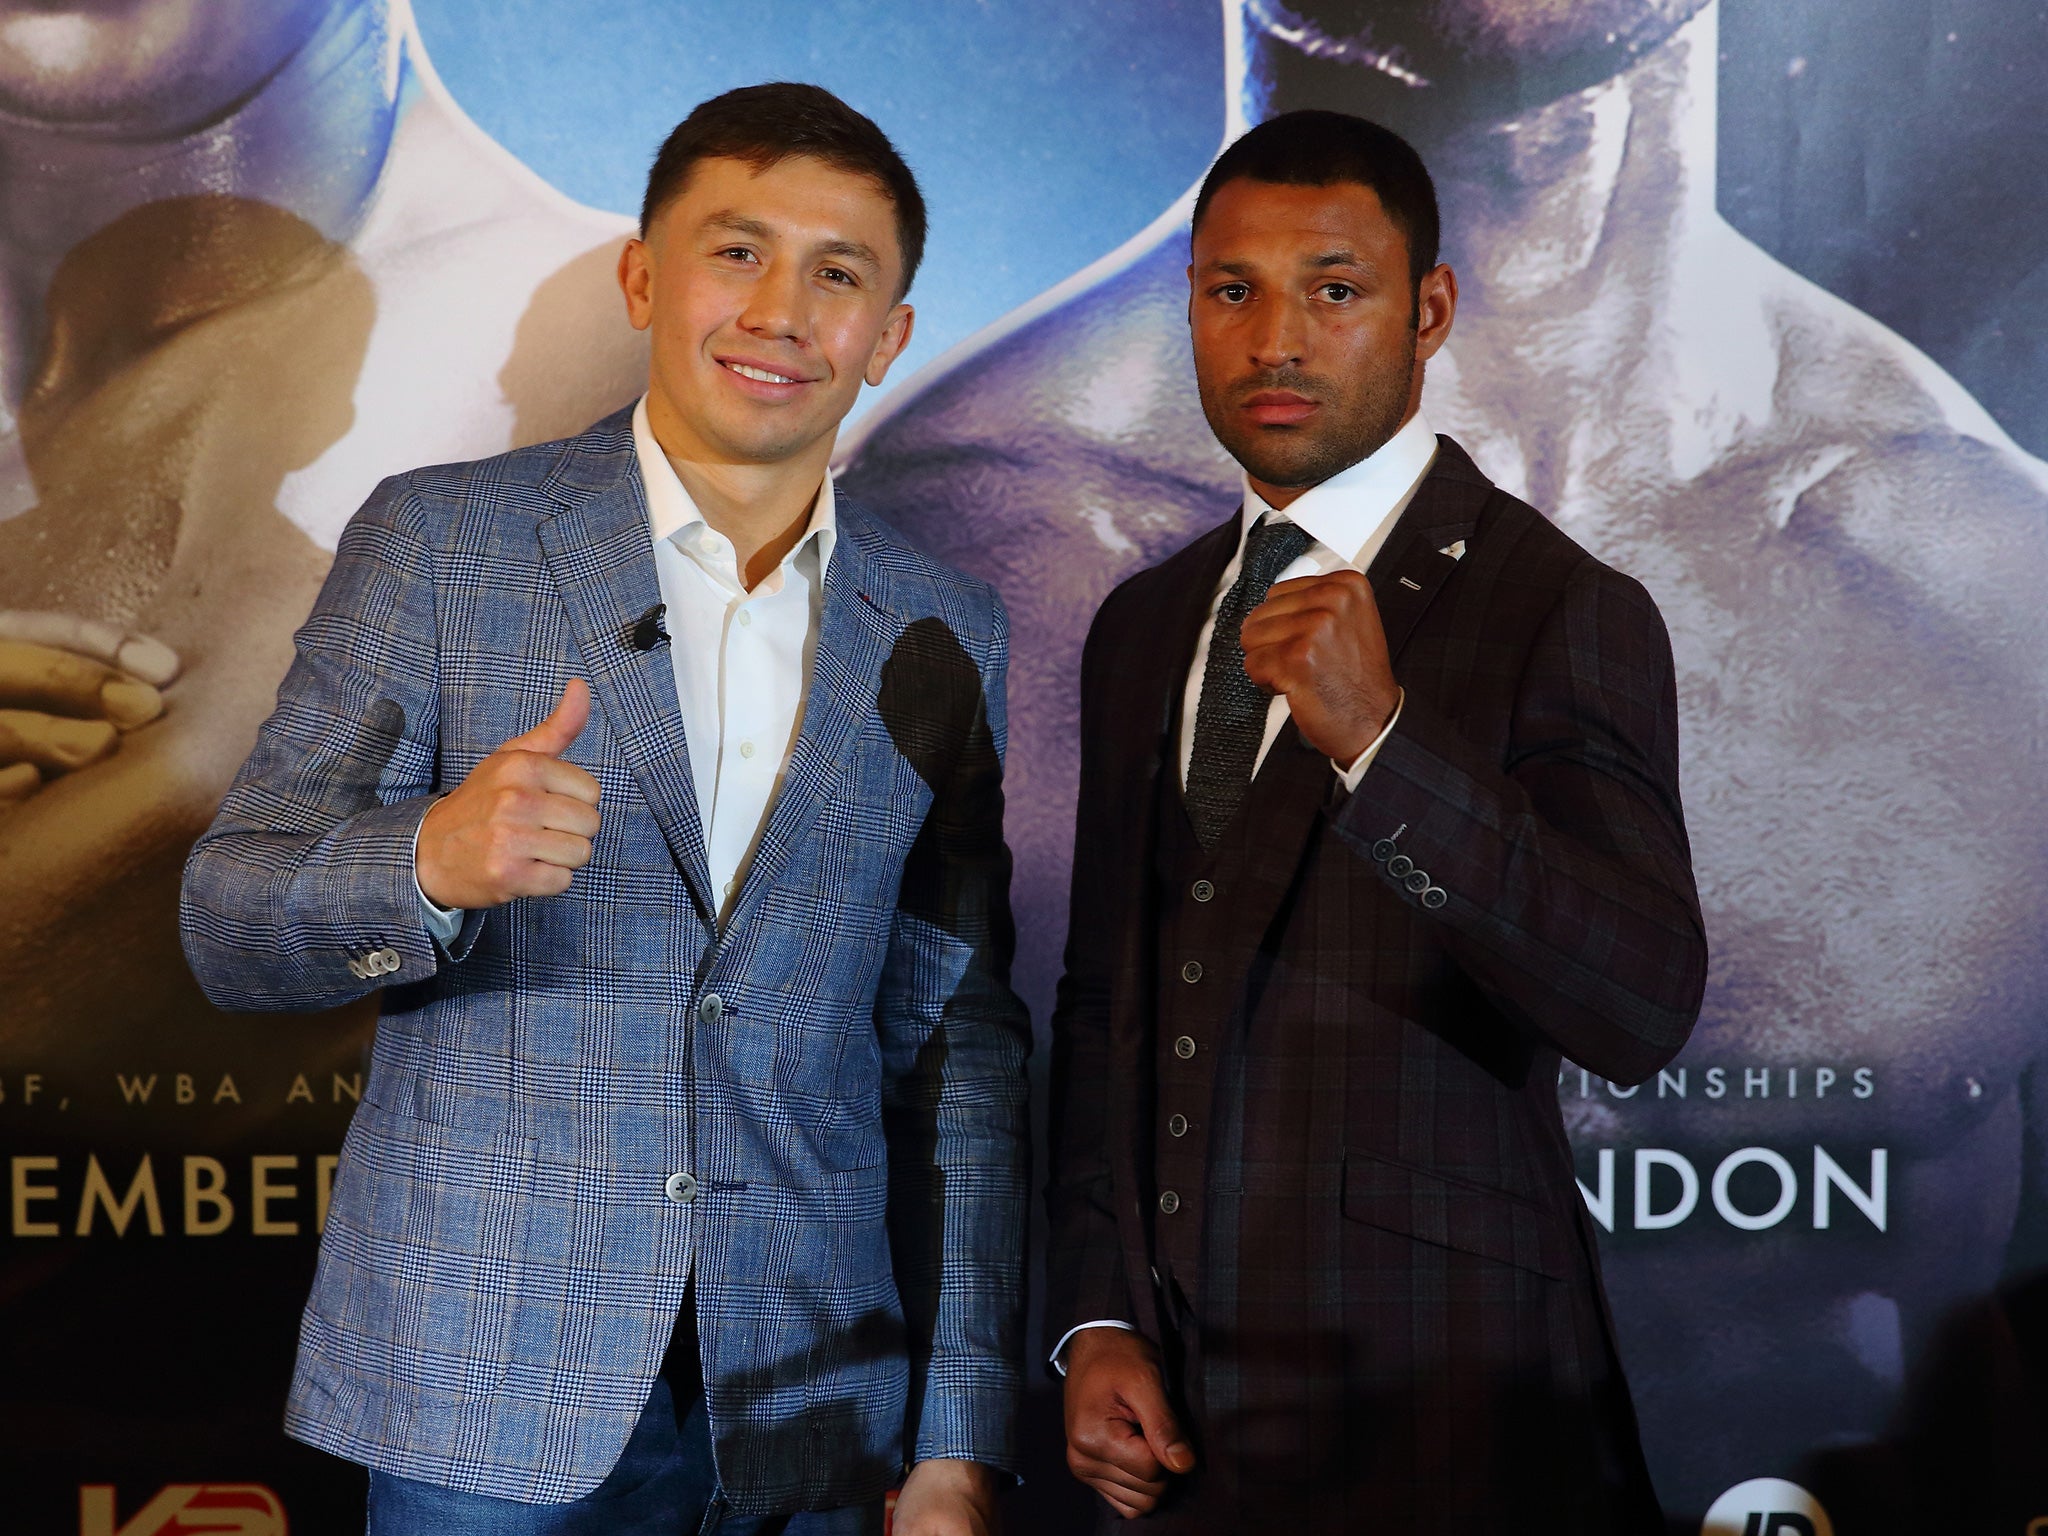 Golovkin and Brook pose at the pre-fight press conference